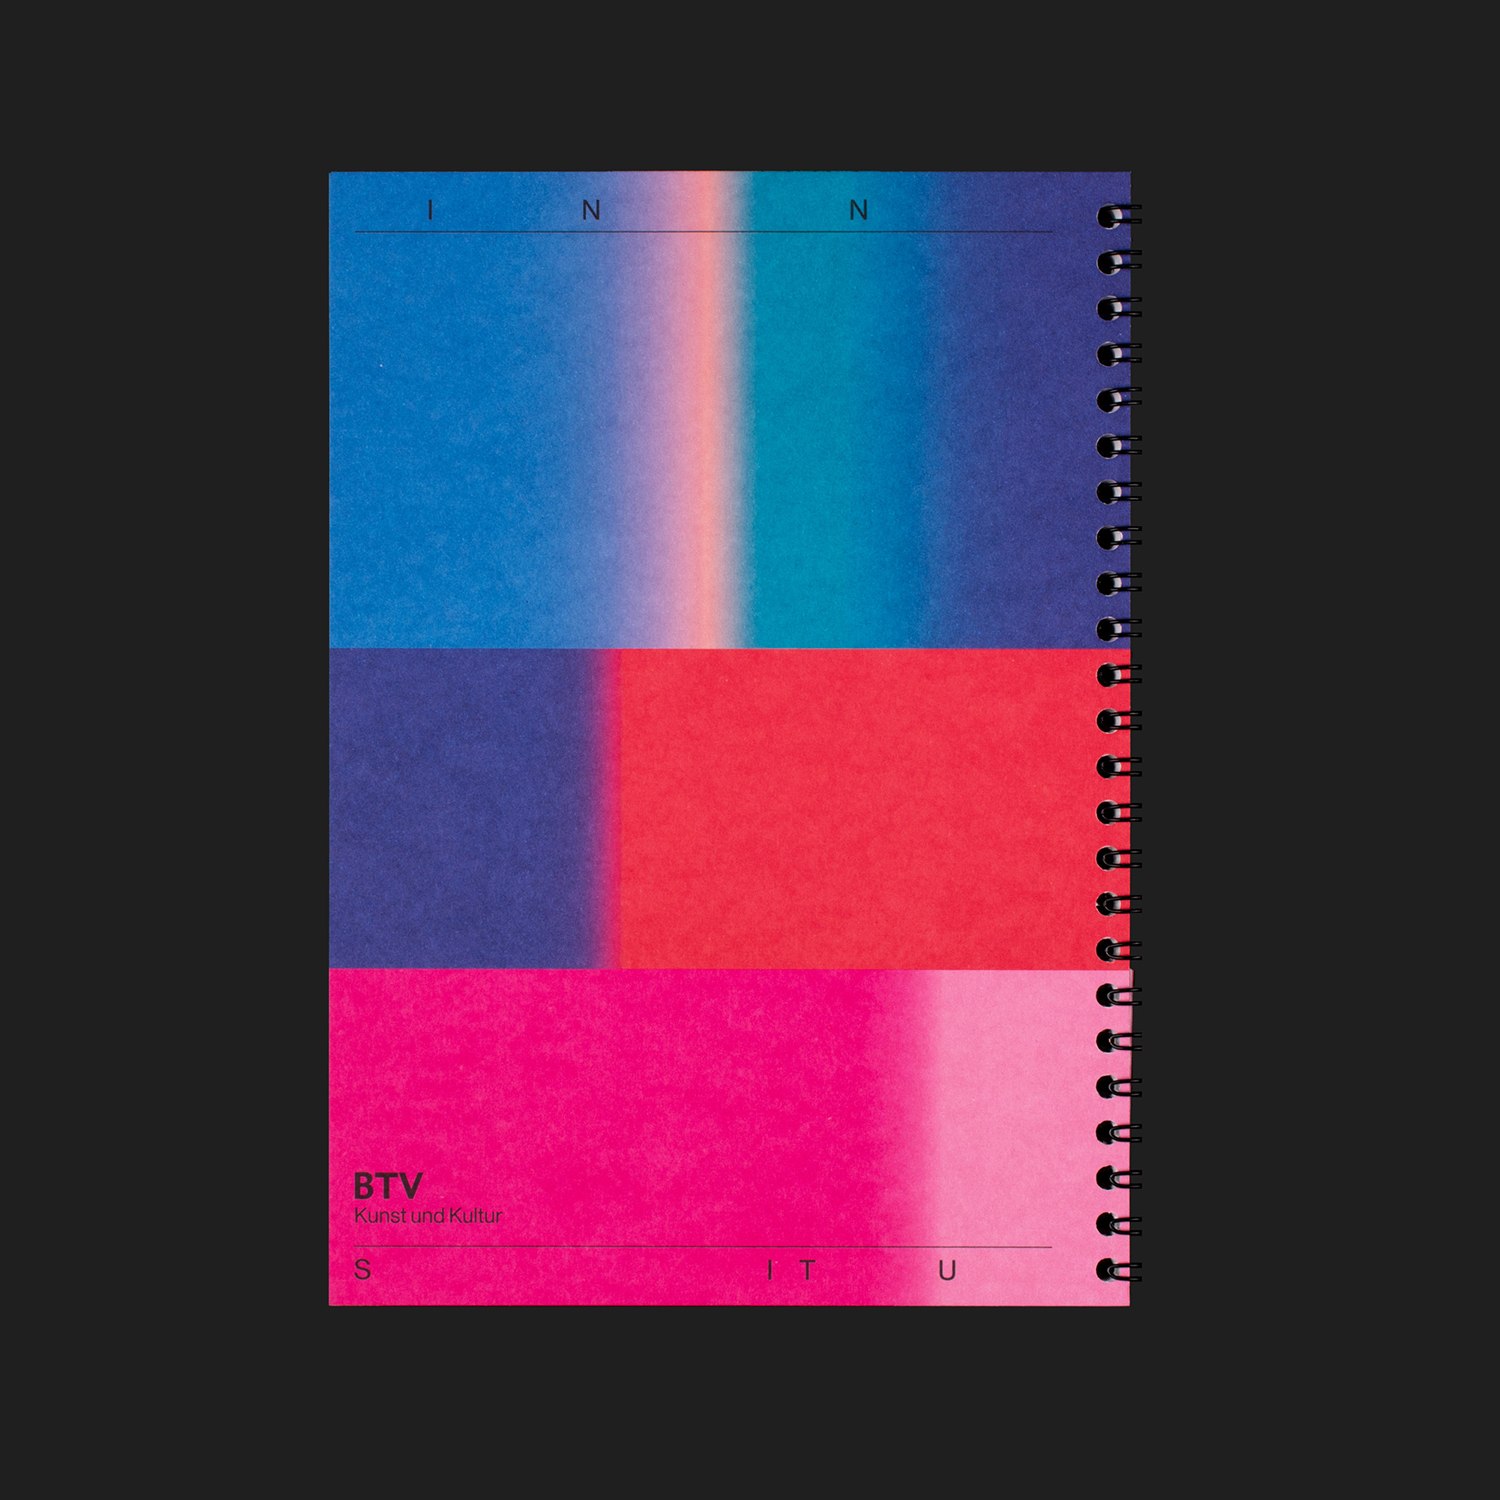 Visual identity, programme and catalogue by Studio Mut for Austrian cultural event Inn Situ